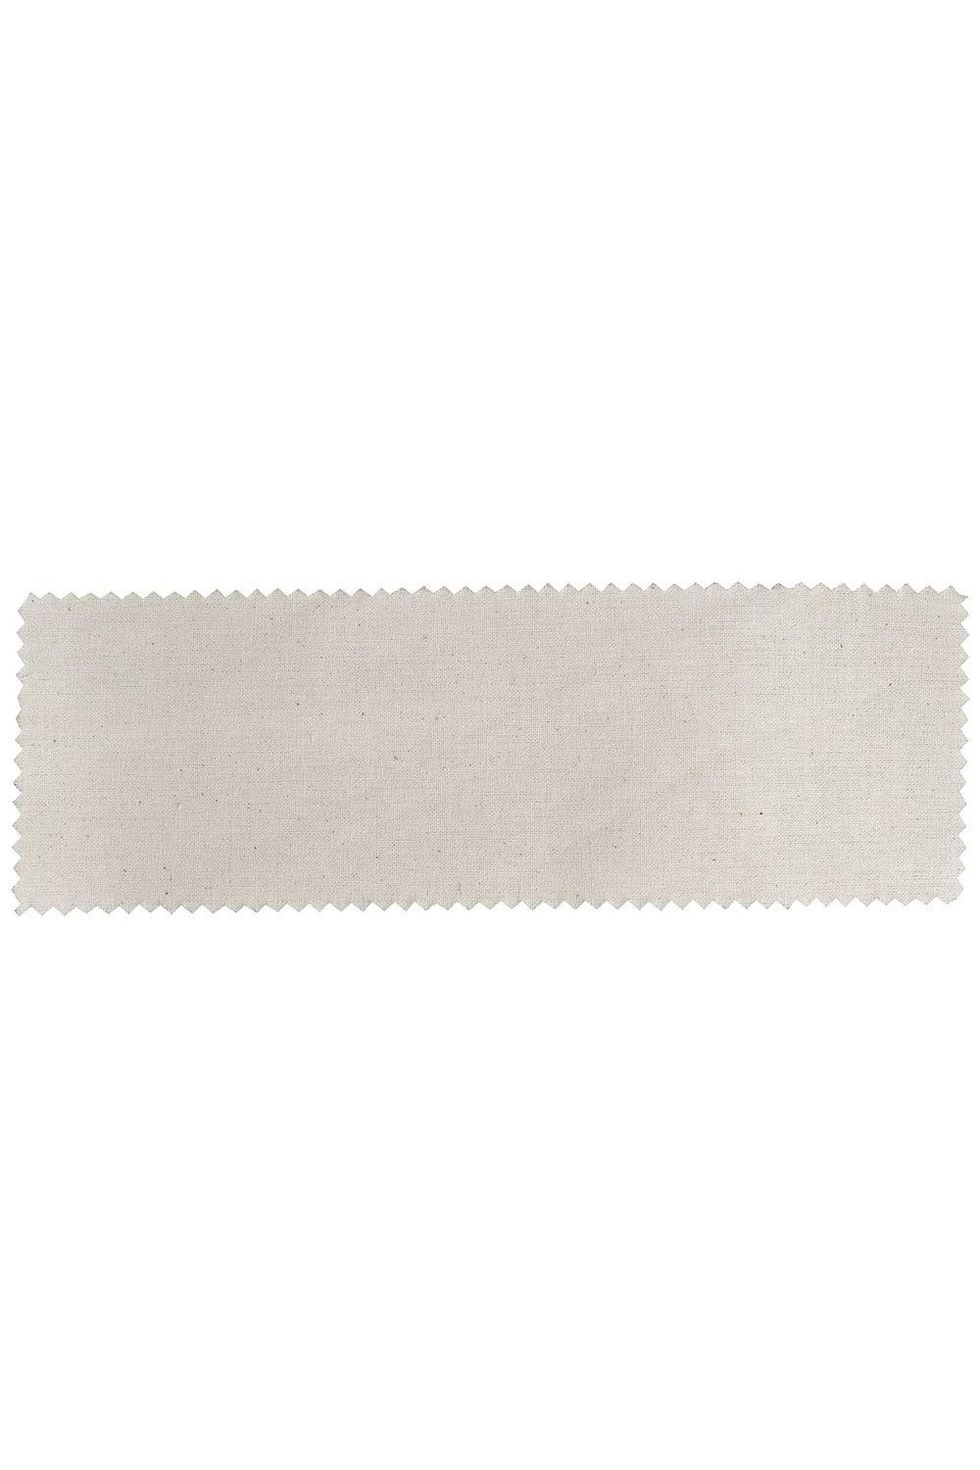 ForPro Professional Collection Natural Muslin Epilating Strips